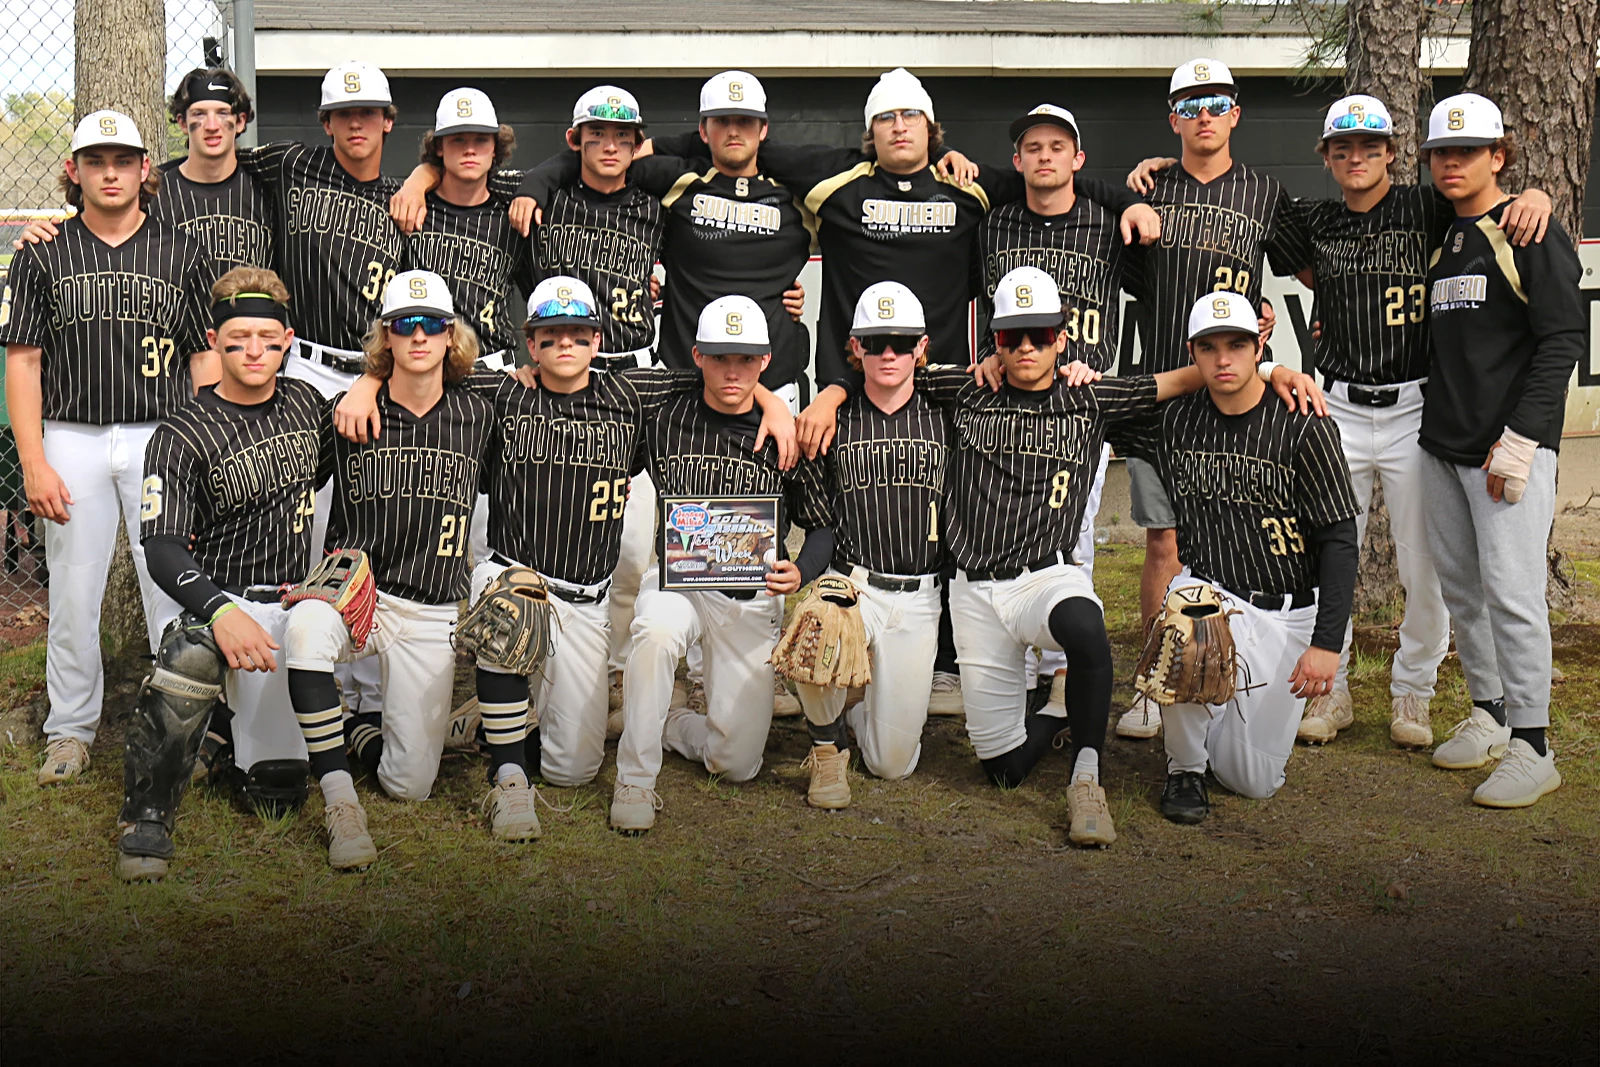 Baseball – Jersey Mike's Team of the Week: Colts Neck